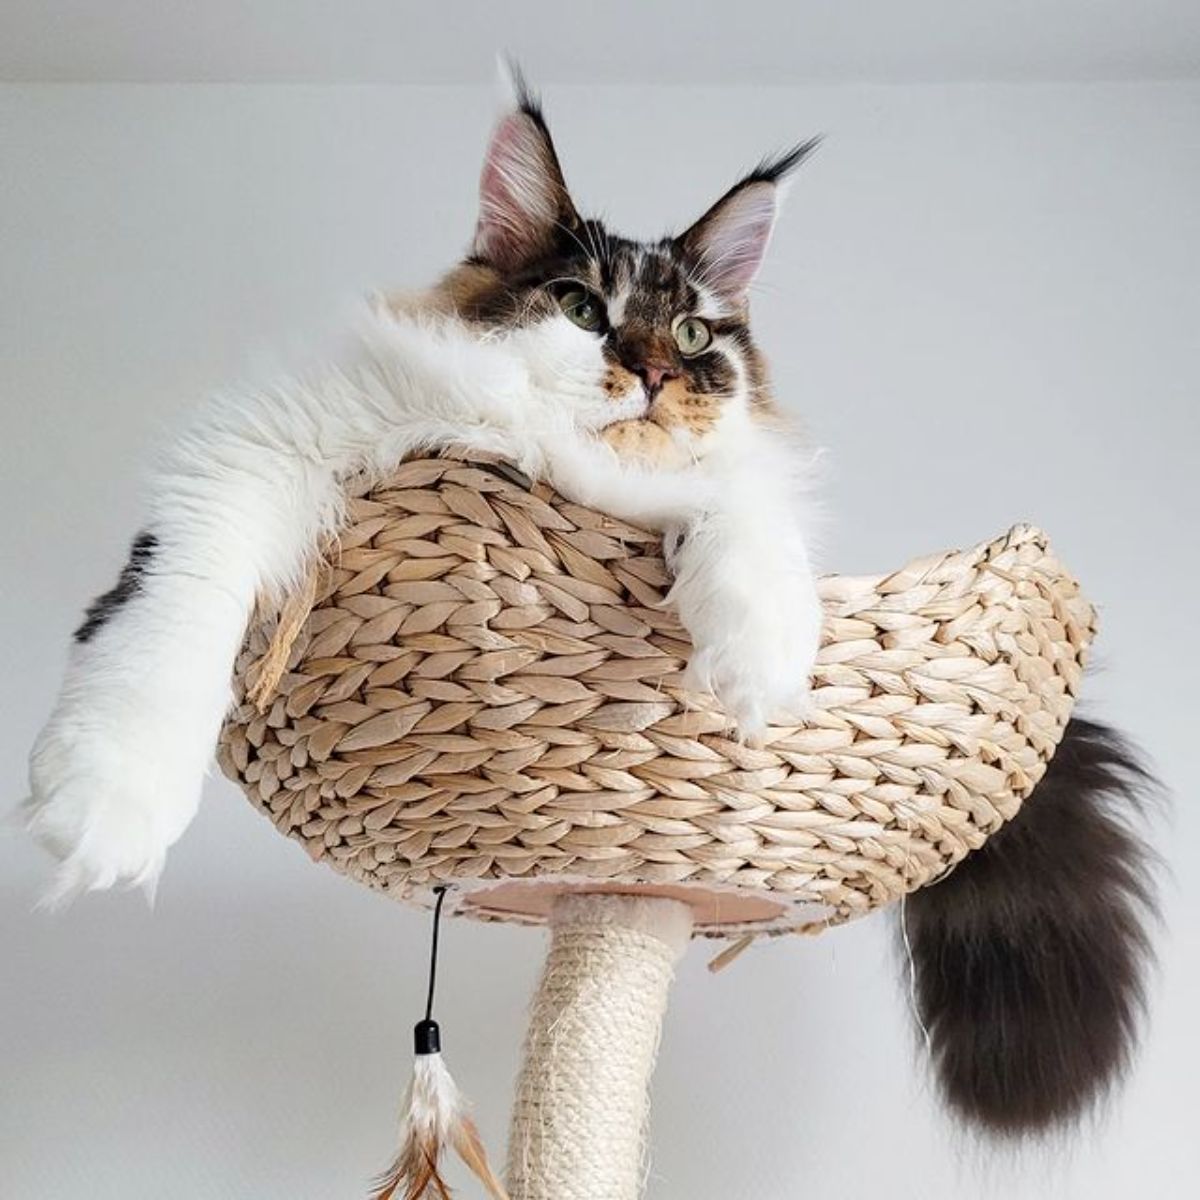 A fluffy calico maine coon lying on a cat tree.